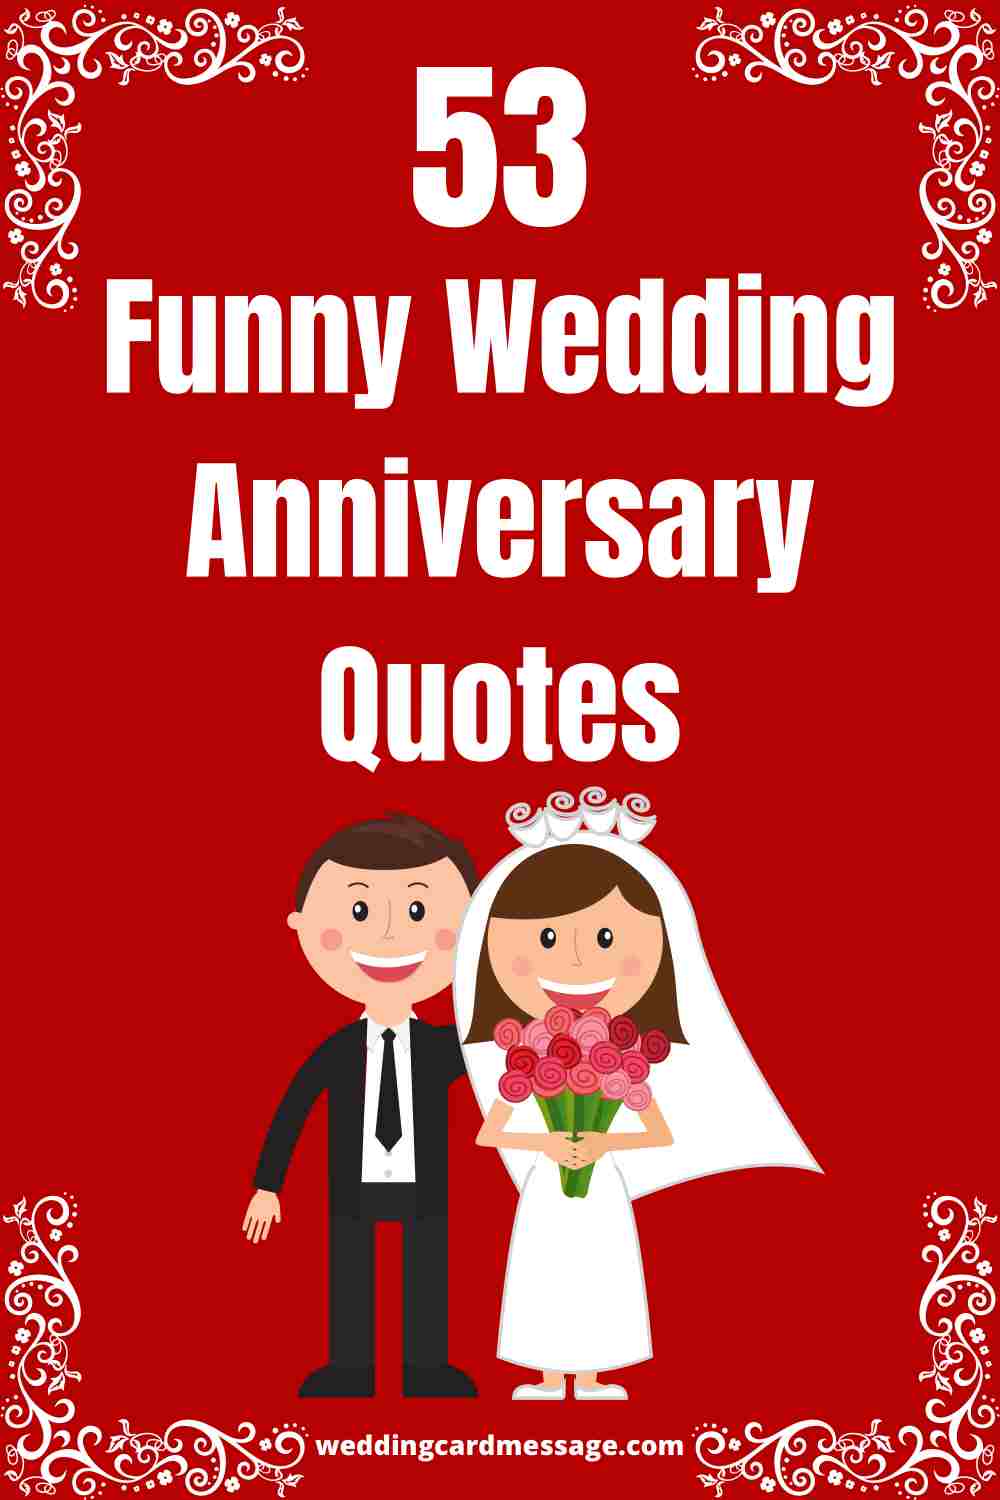 53 Funny Wedding Anniversary Quotes and Sayings - Wedding Card Message